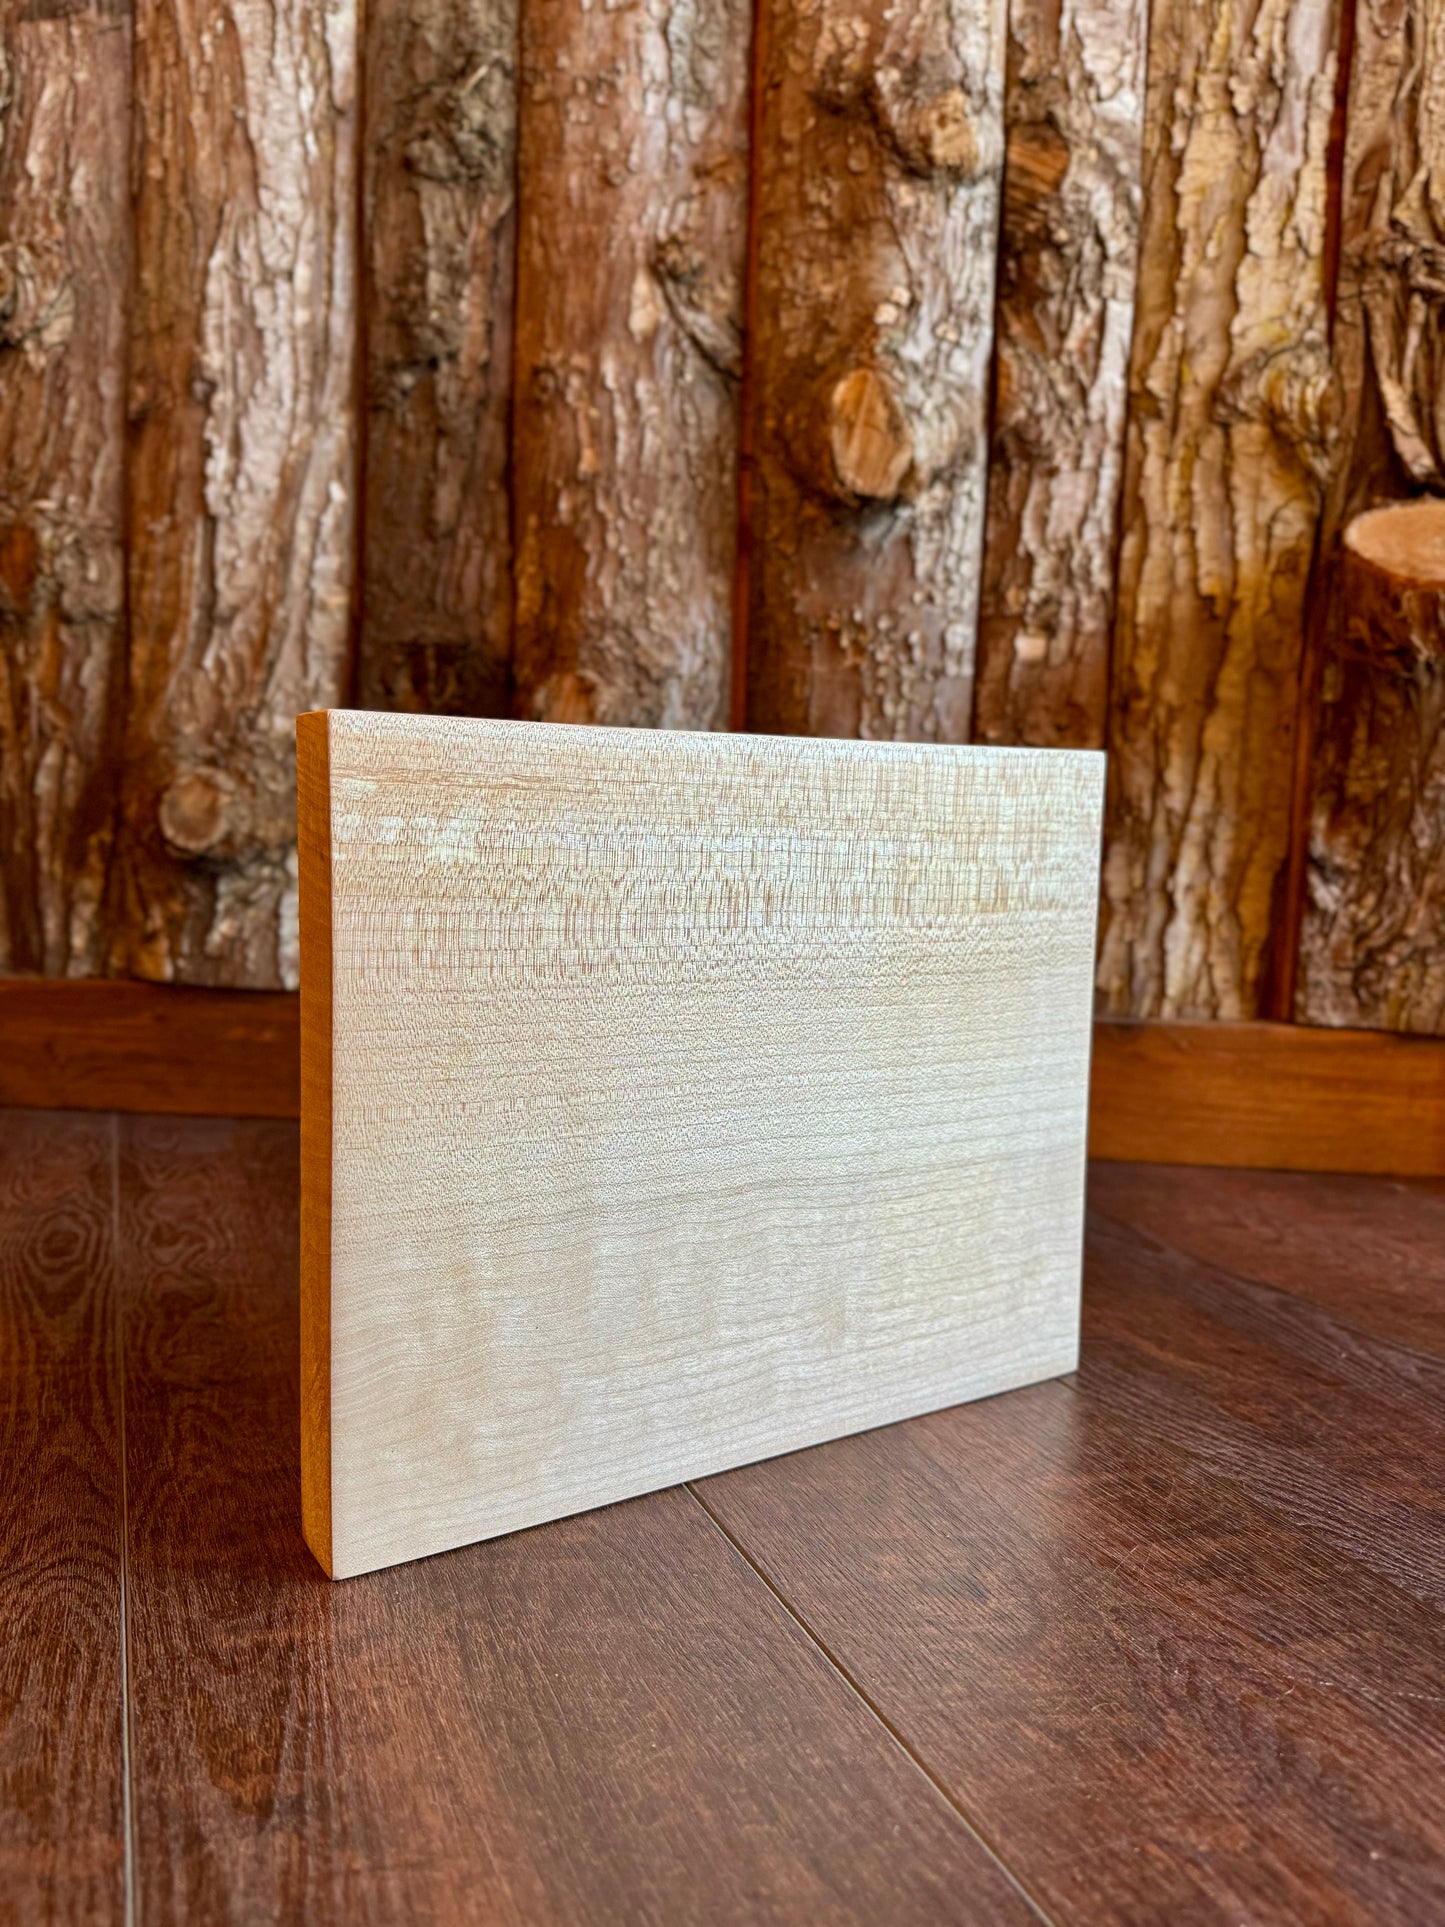 ITEM 132: LOCALLY-MADE cutting boards